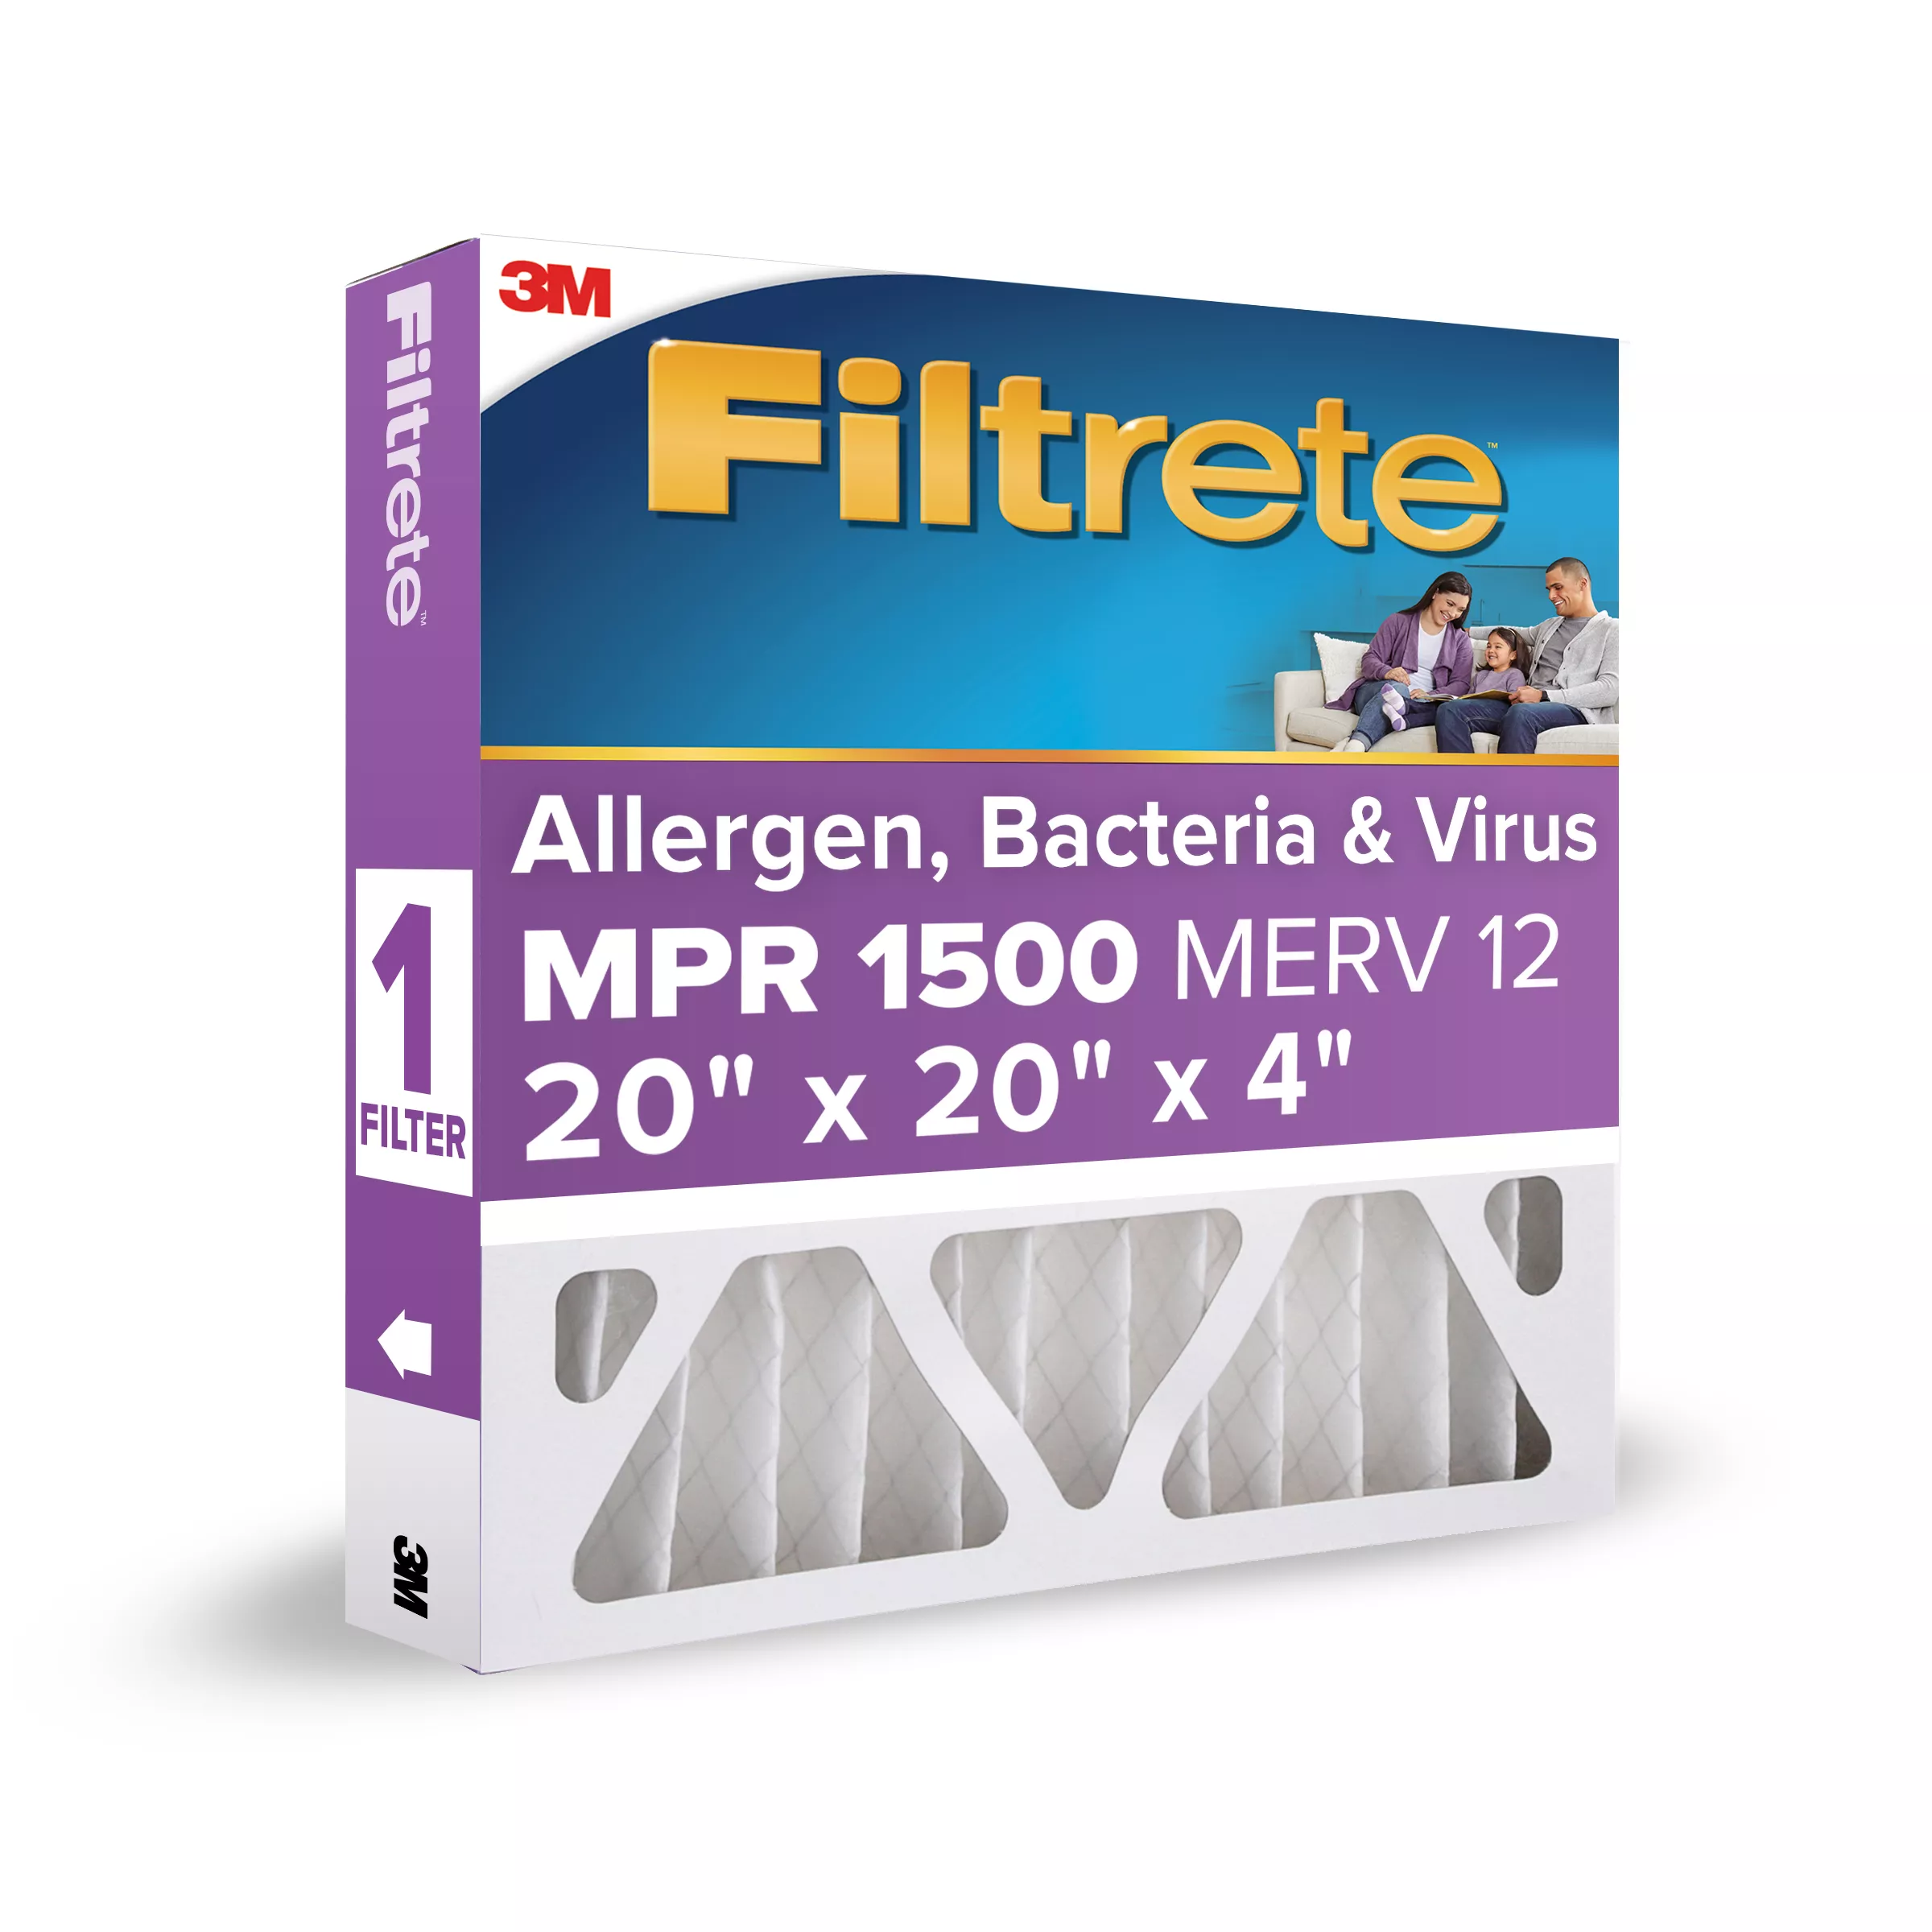 Filtrete™ Allergen Reduction Filters Display DP03-HDW-DC5, 5
Filters/Tray